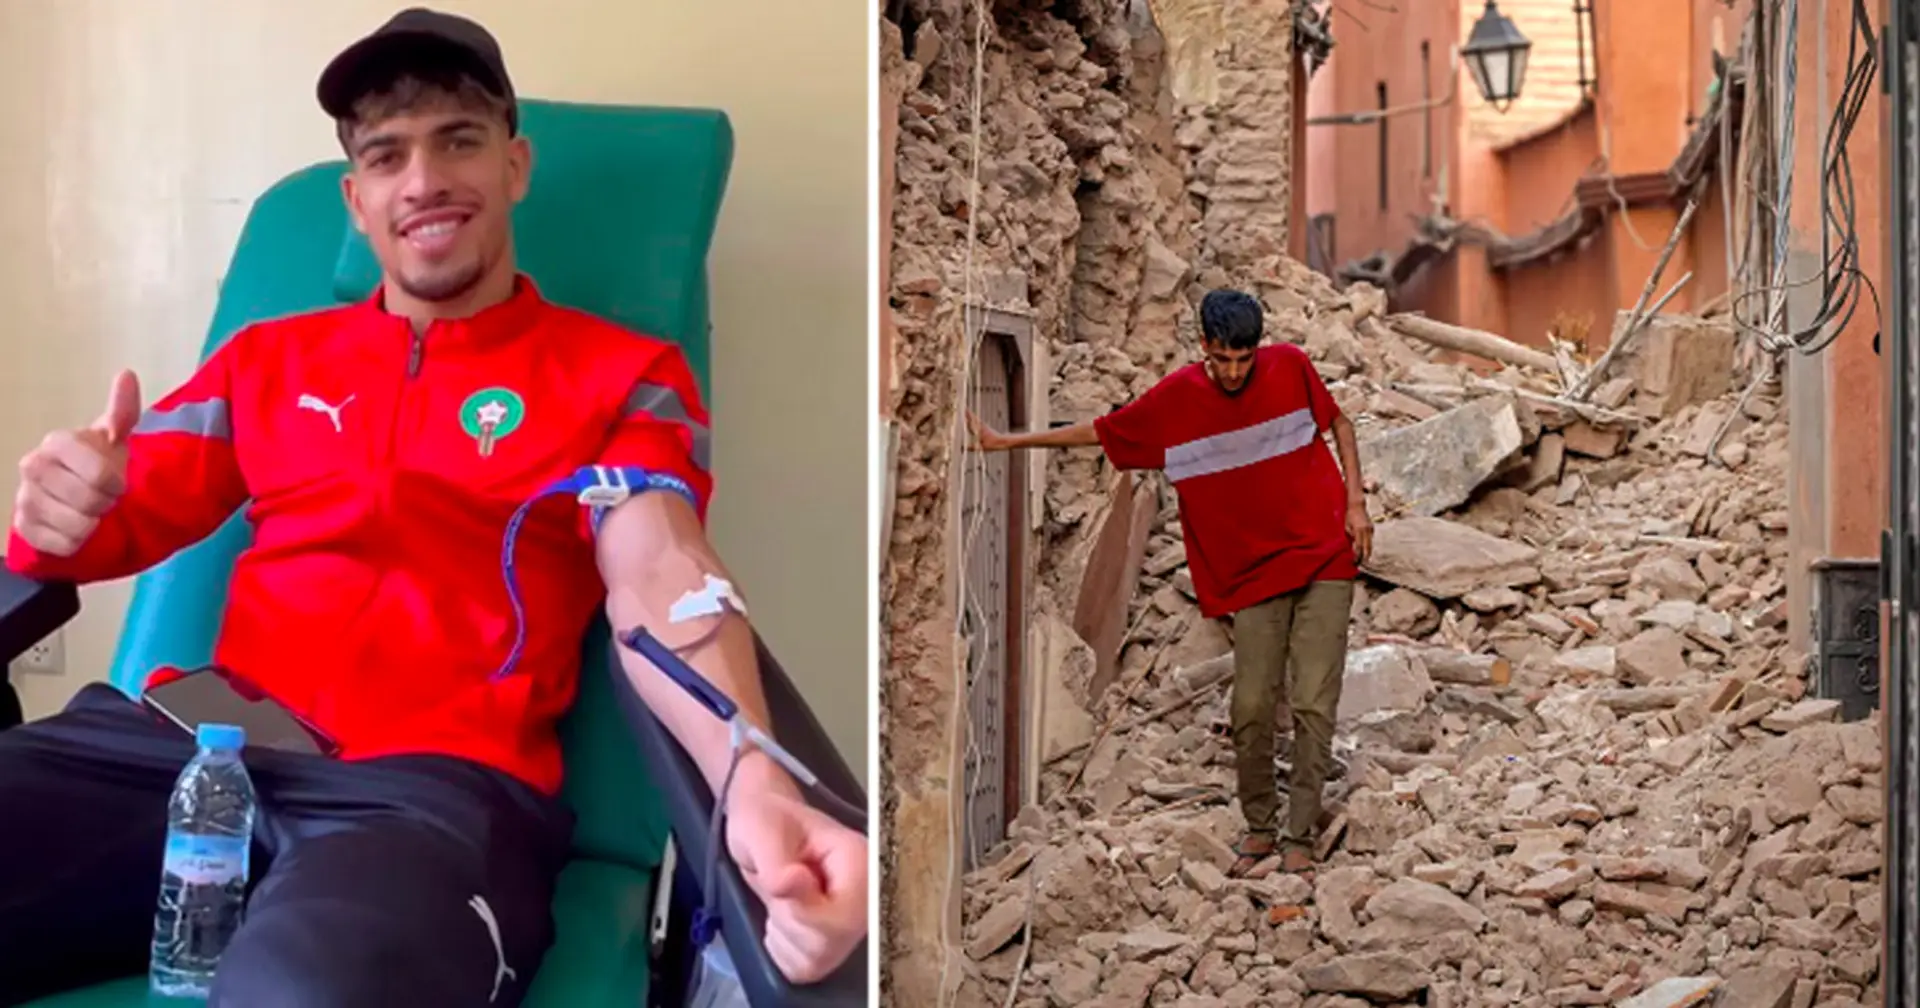 Abde donates blood to victims of Morocco earthquake – over 1,300 people considered dead